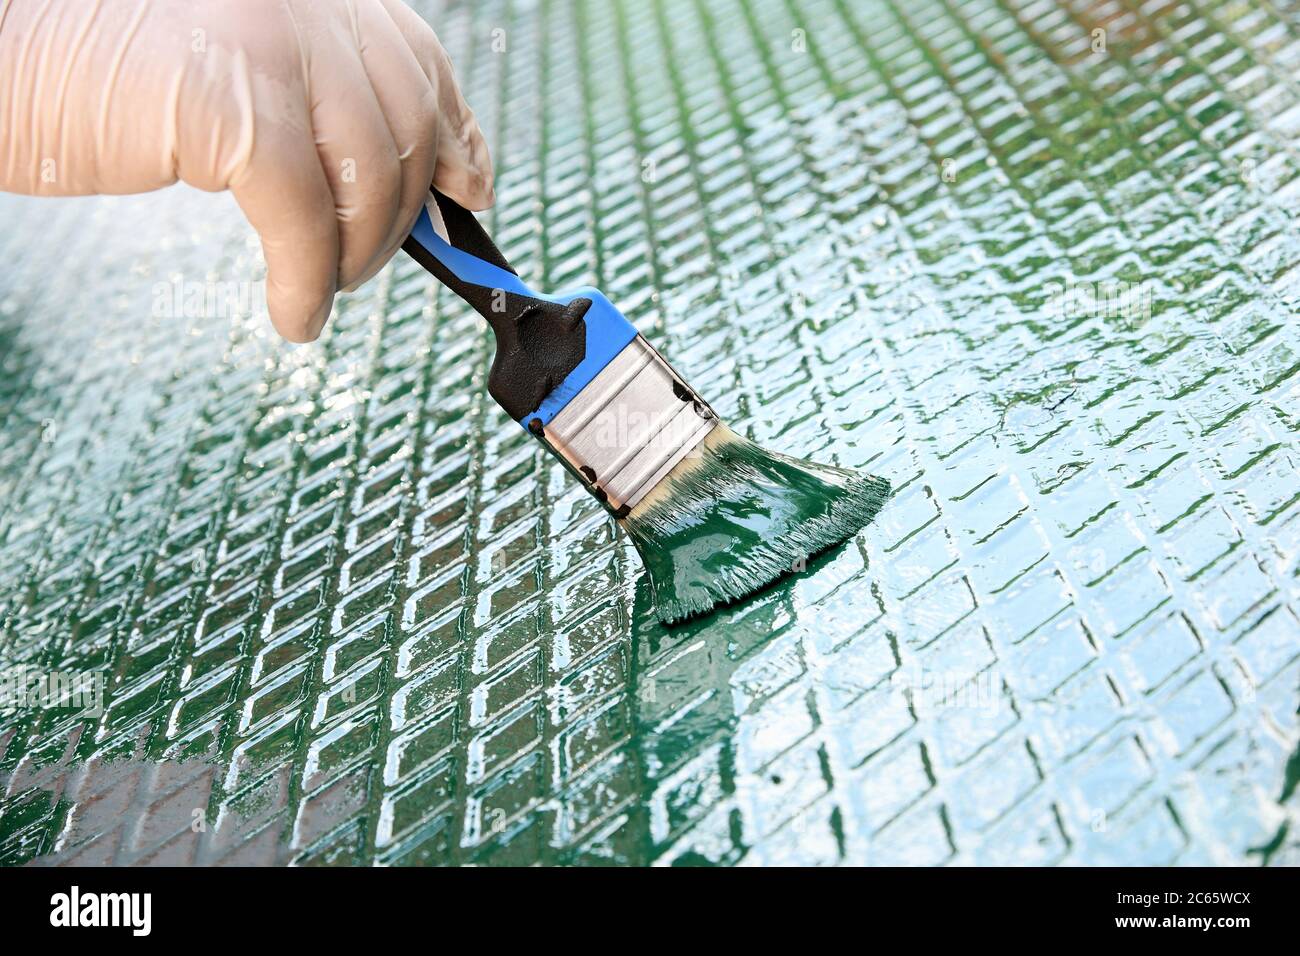 Person refreshing the green paint on a metal grid with diamond pattern in a close up view of a gloved hand and paintbrush Stock Photo